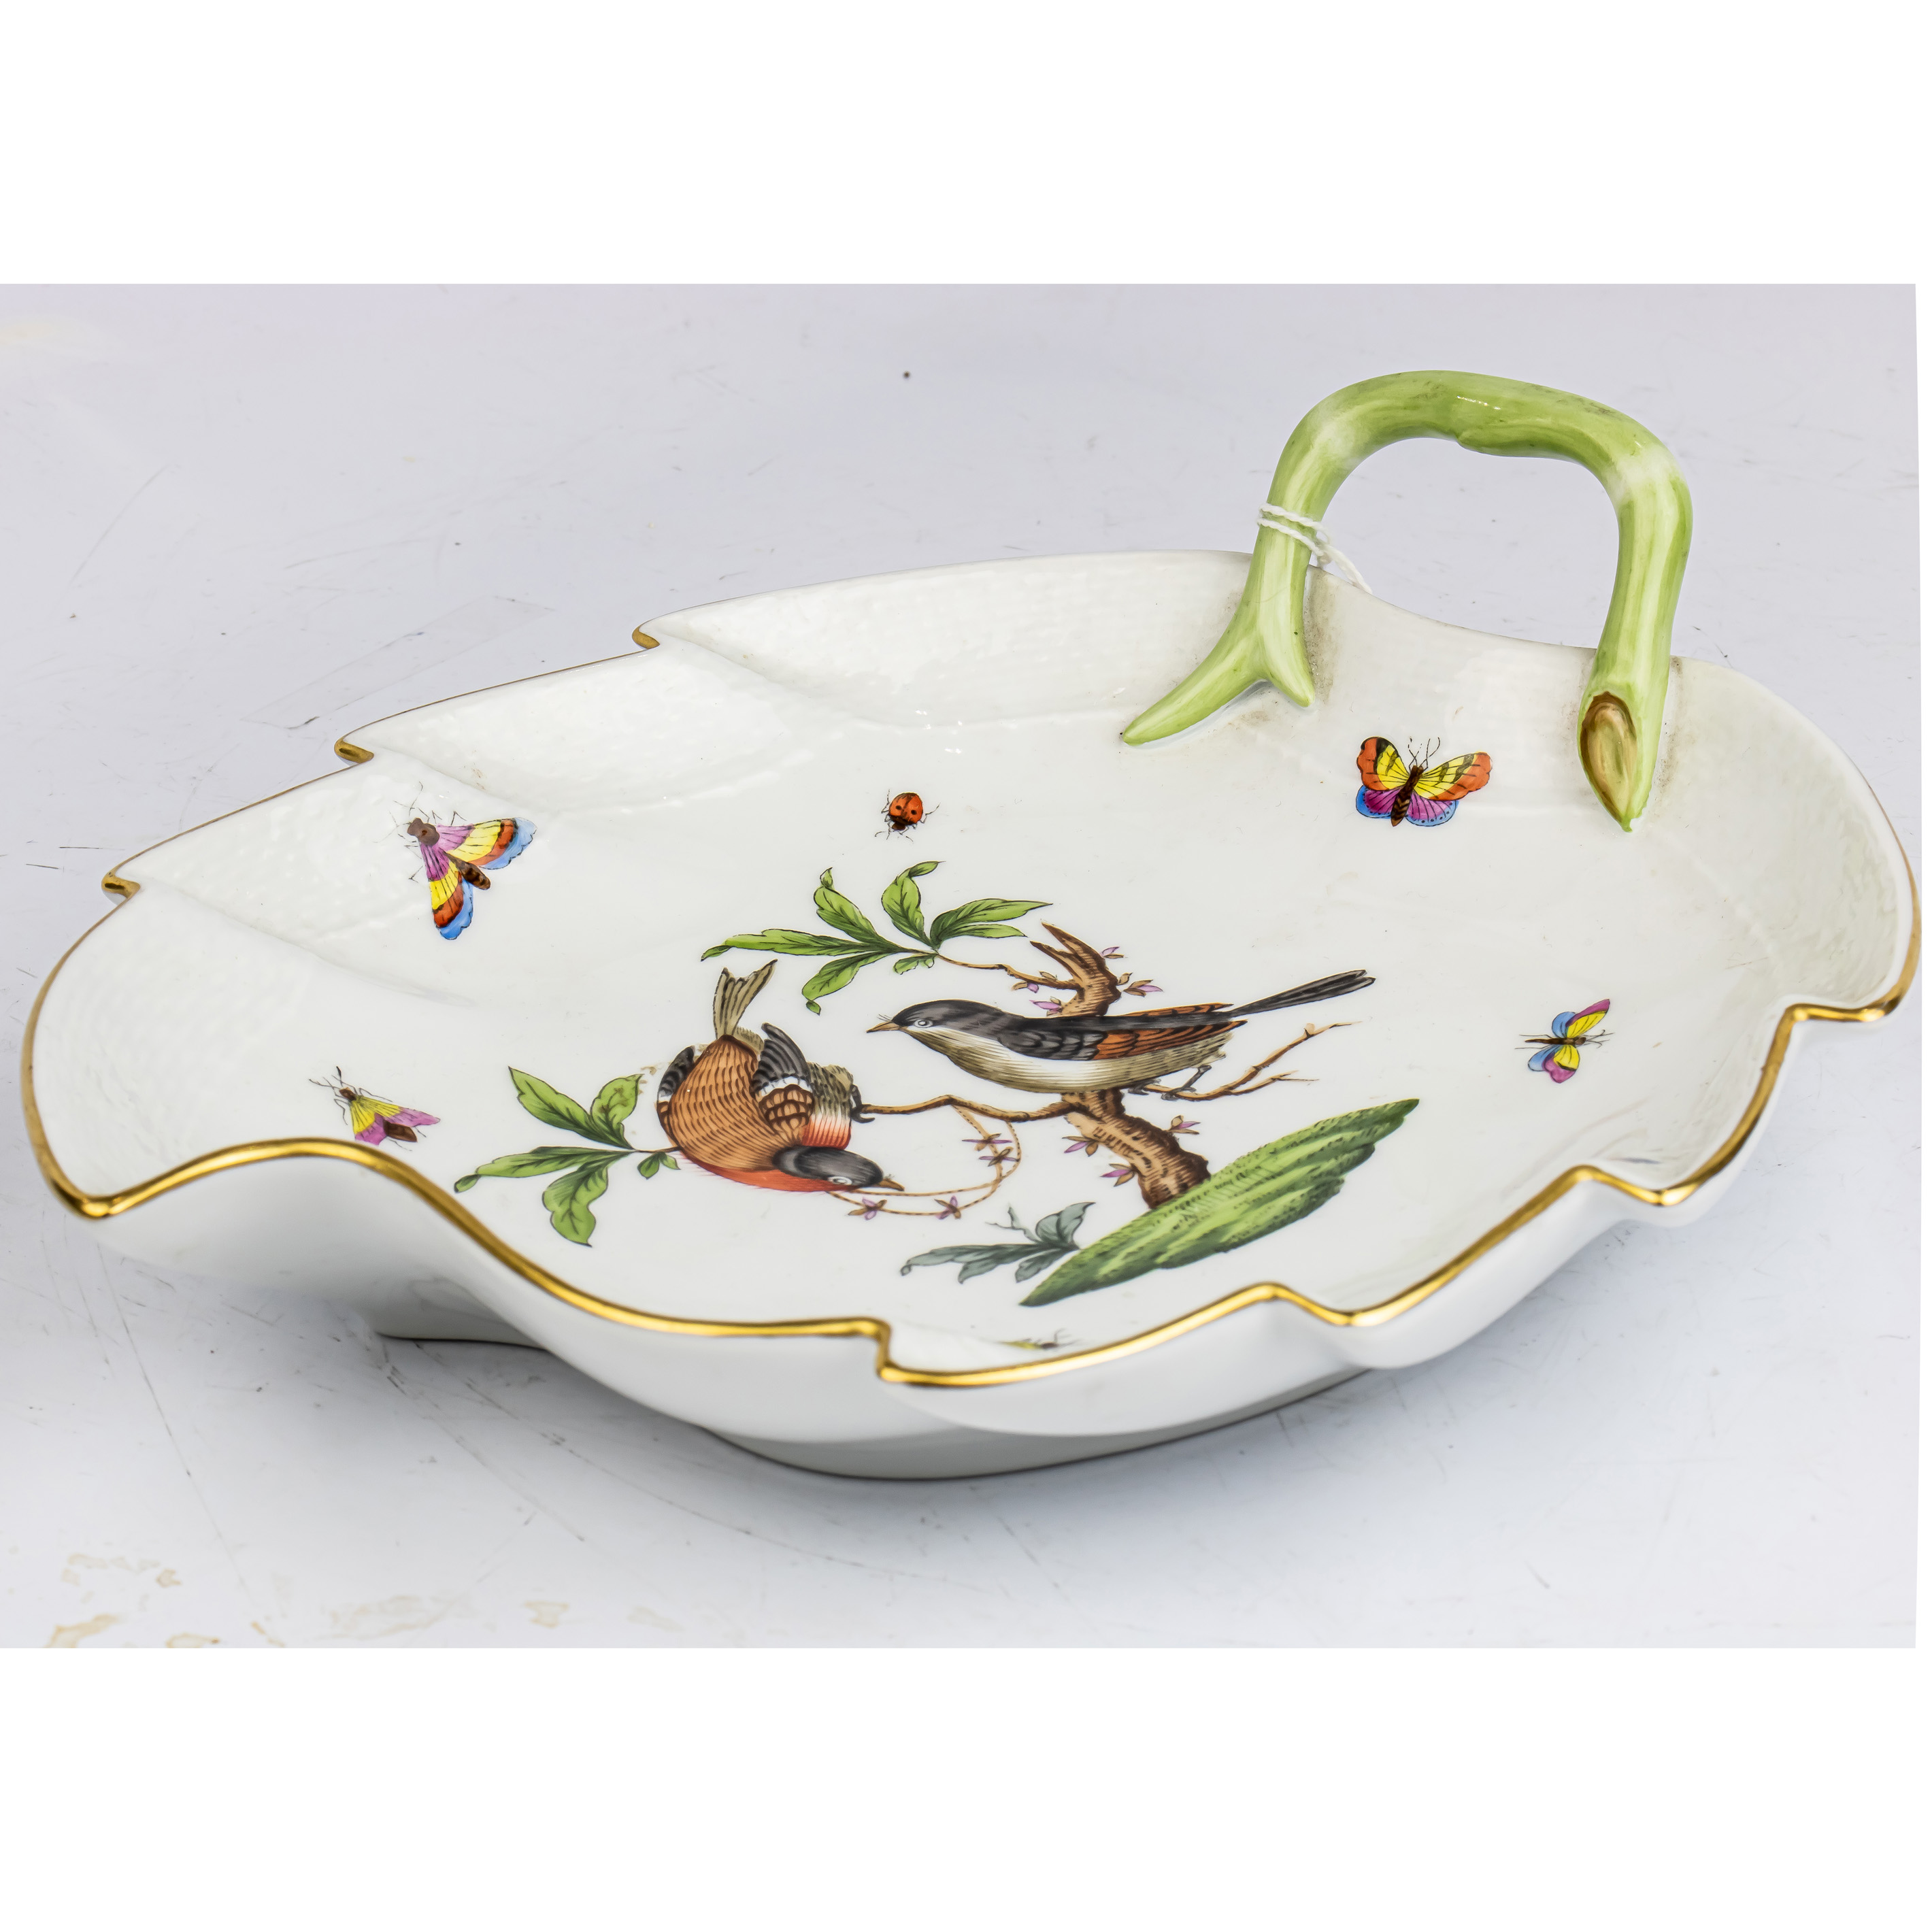 HEREND PORCELAIN LEAF DISH IN THE